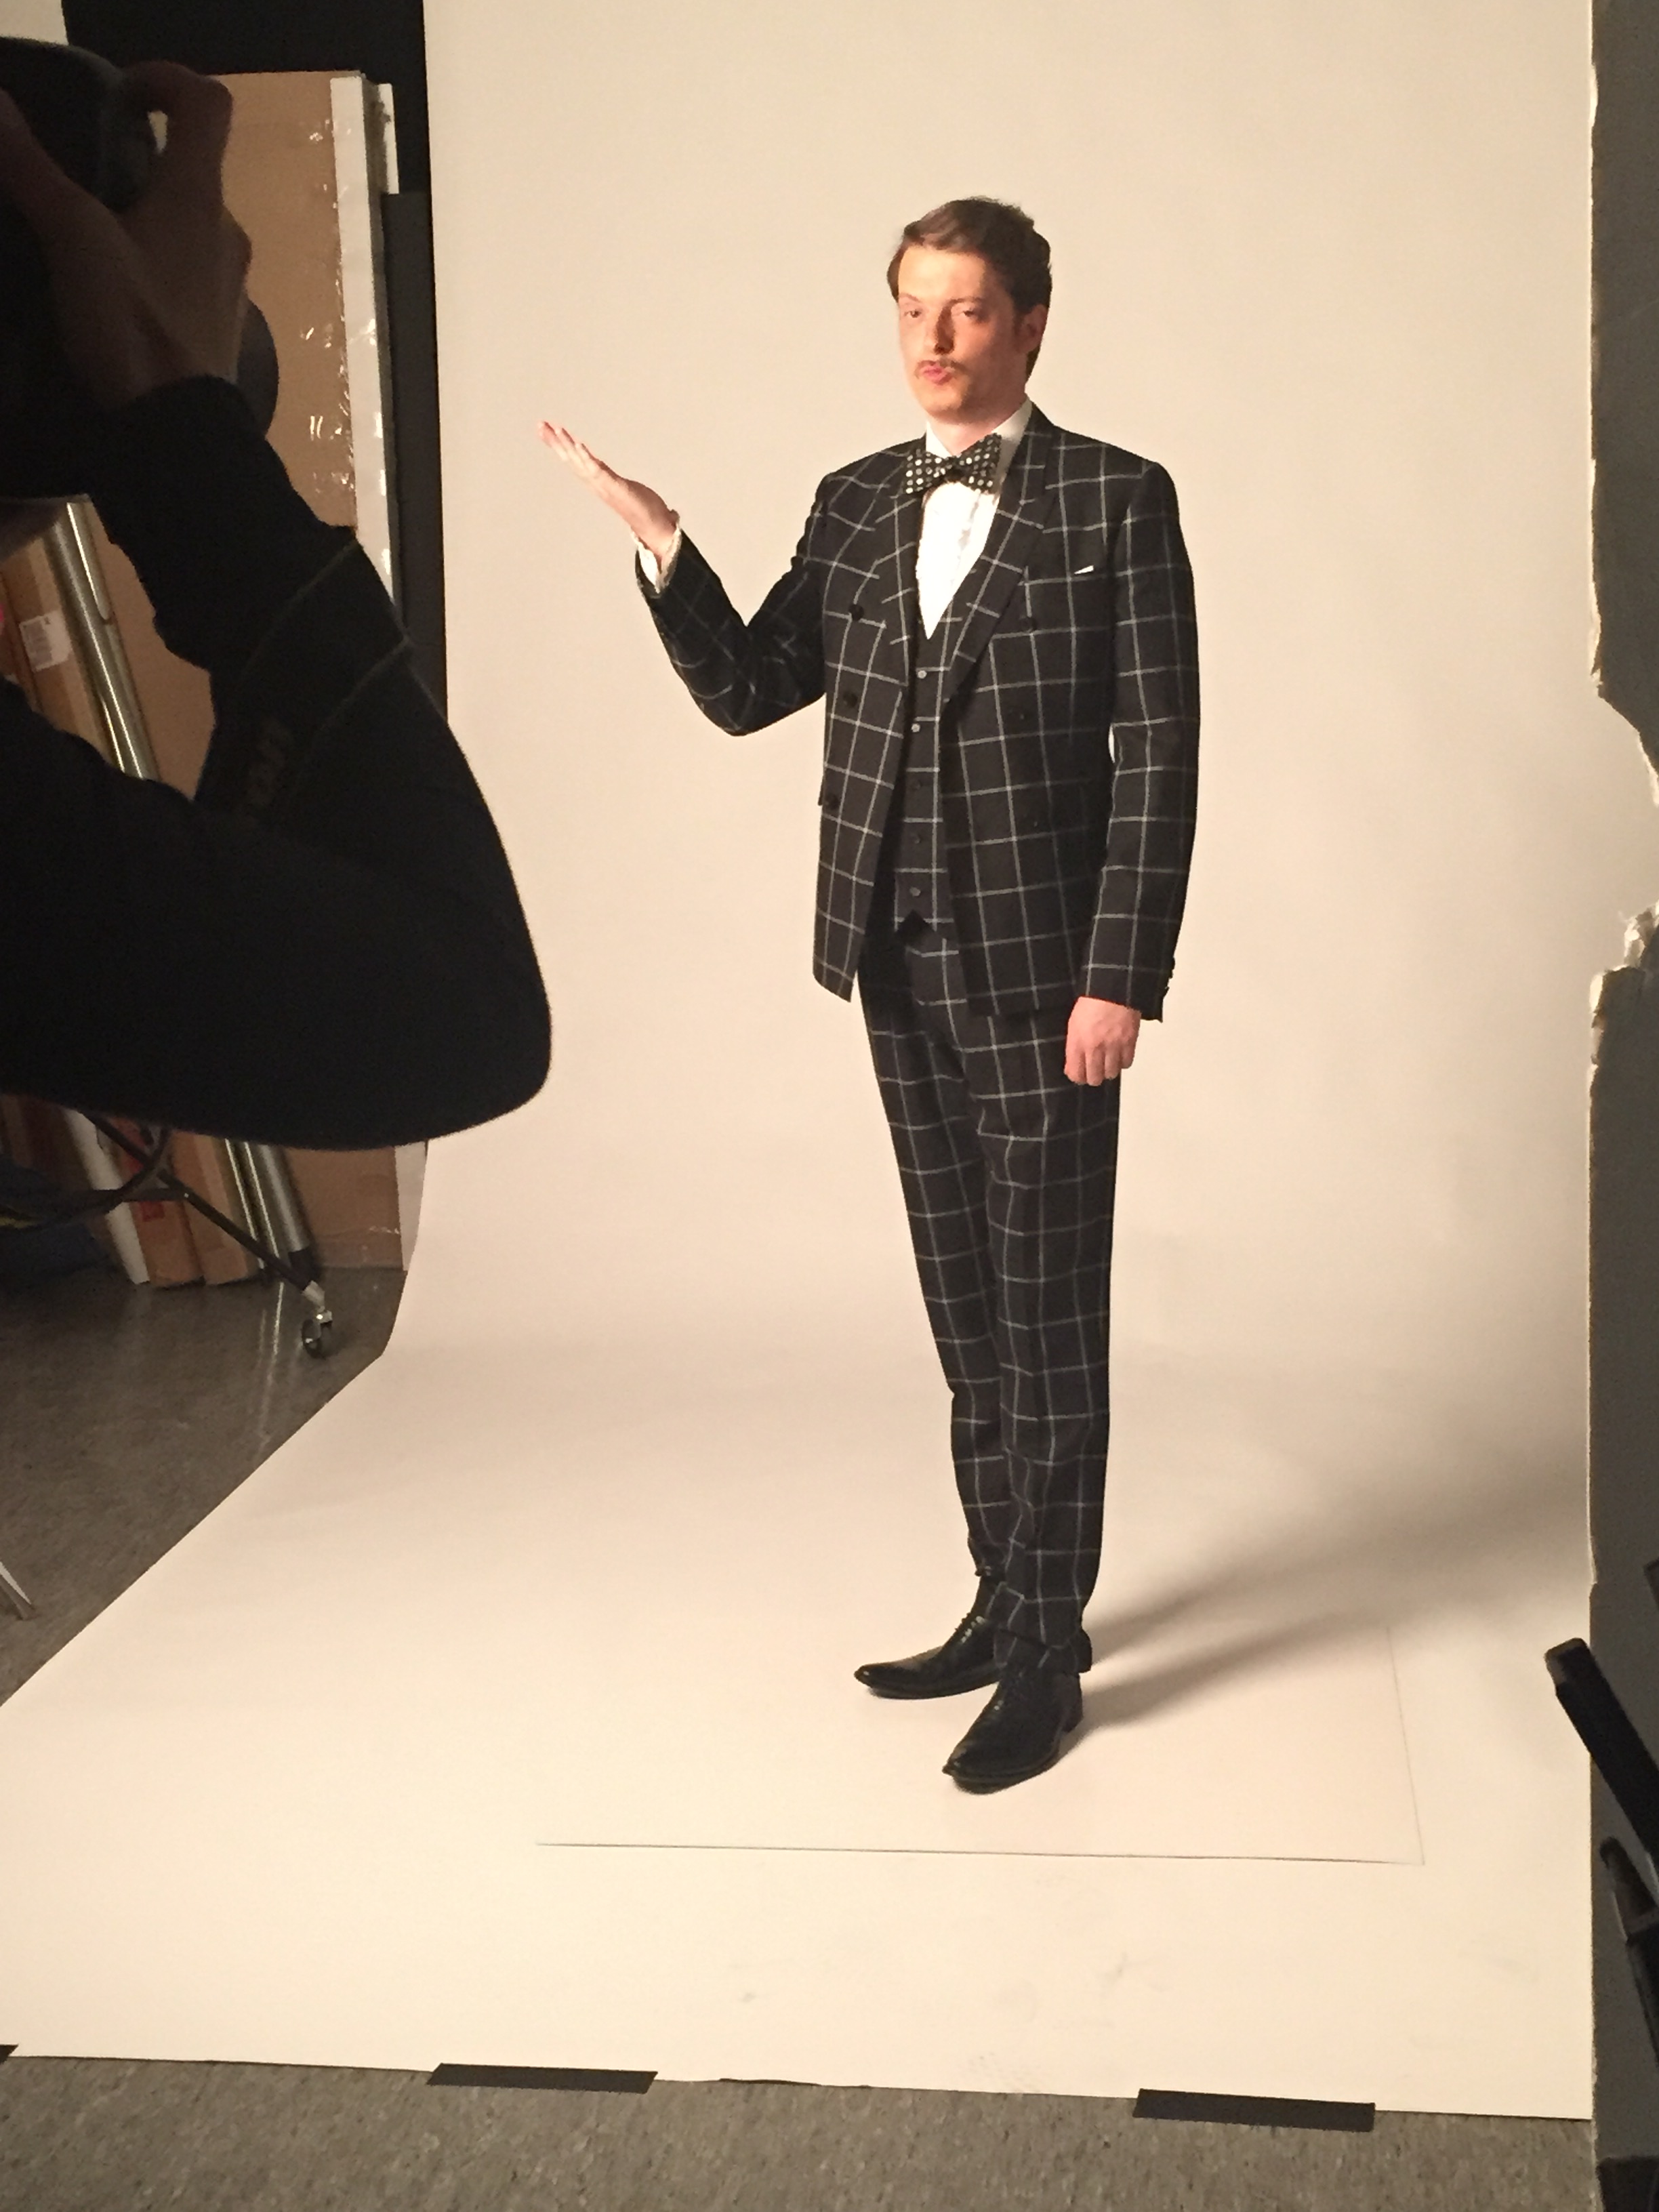 Man in plaid suit poses for camer in photo studio